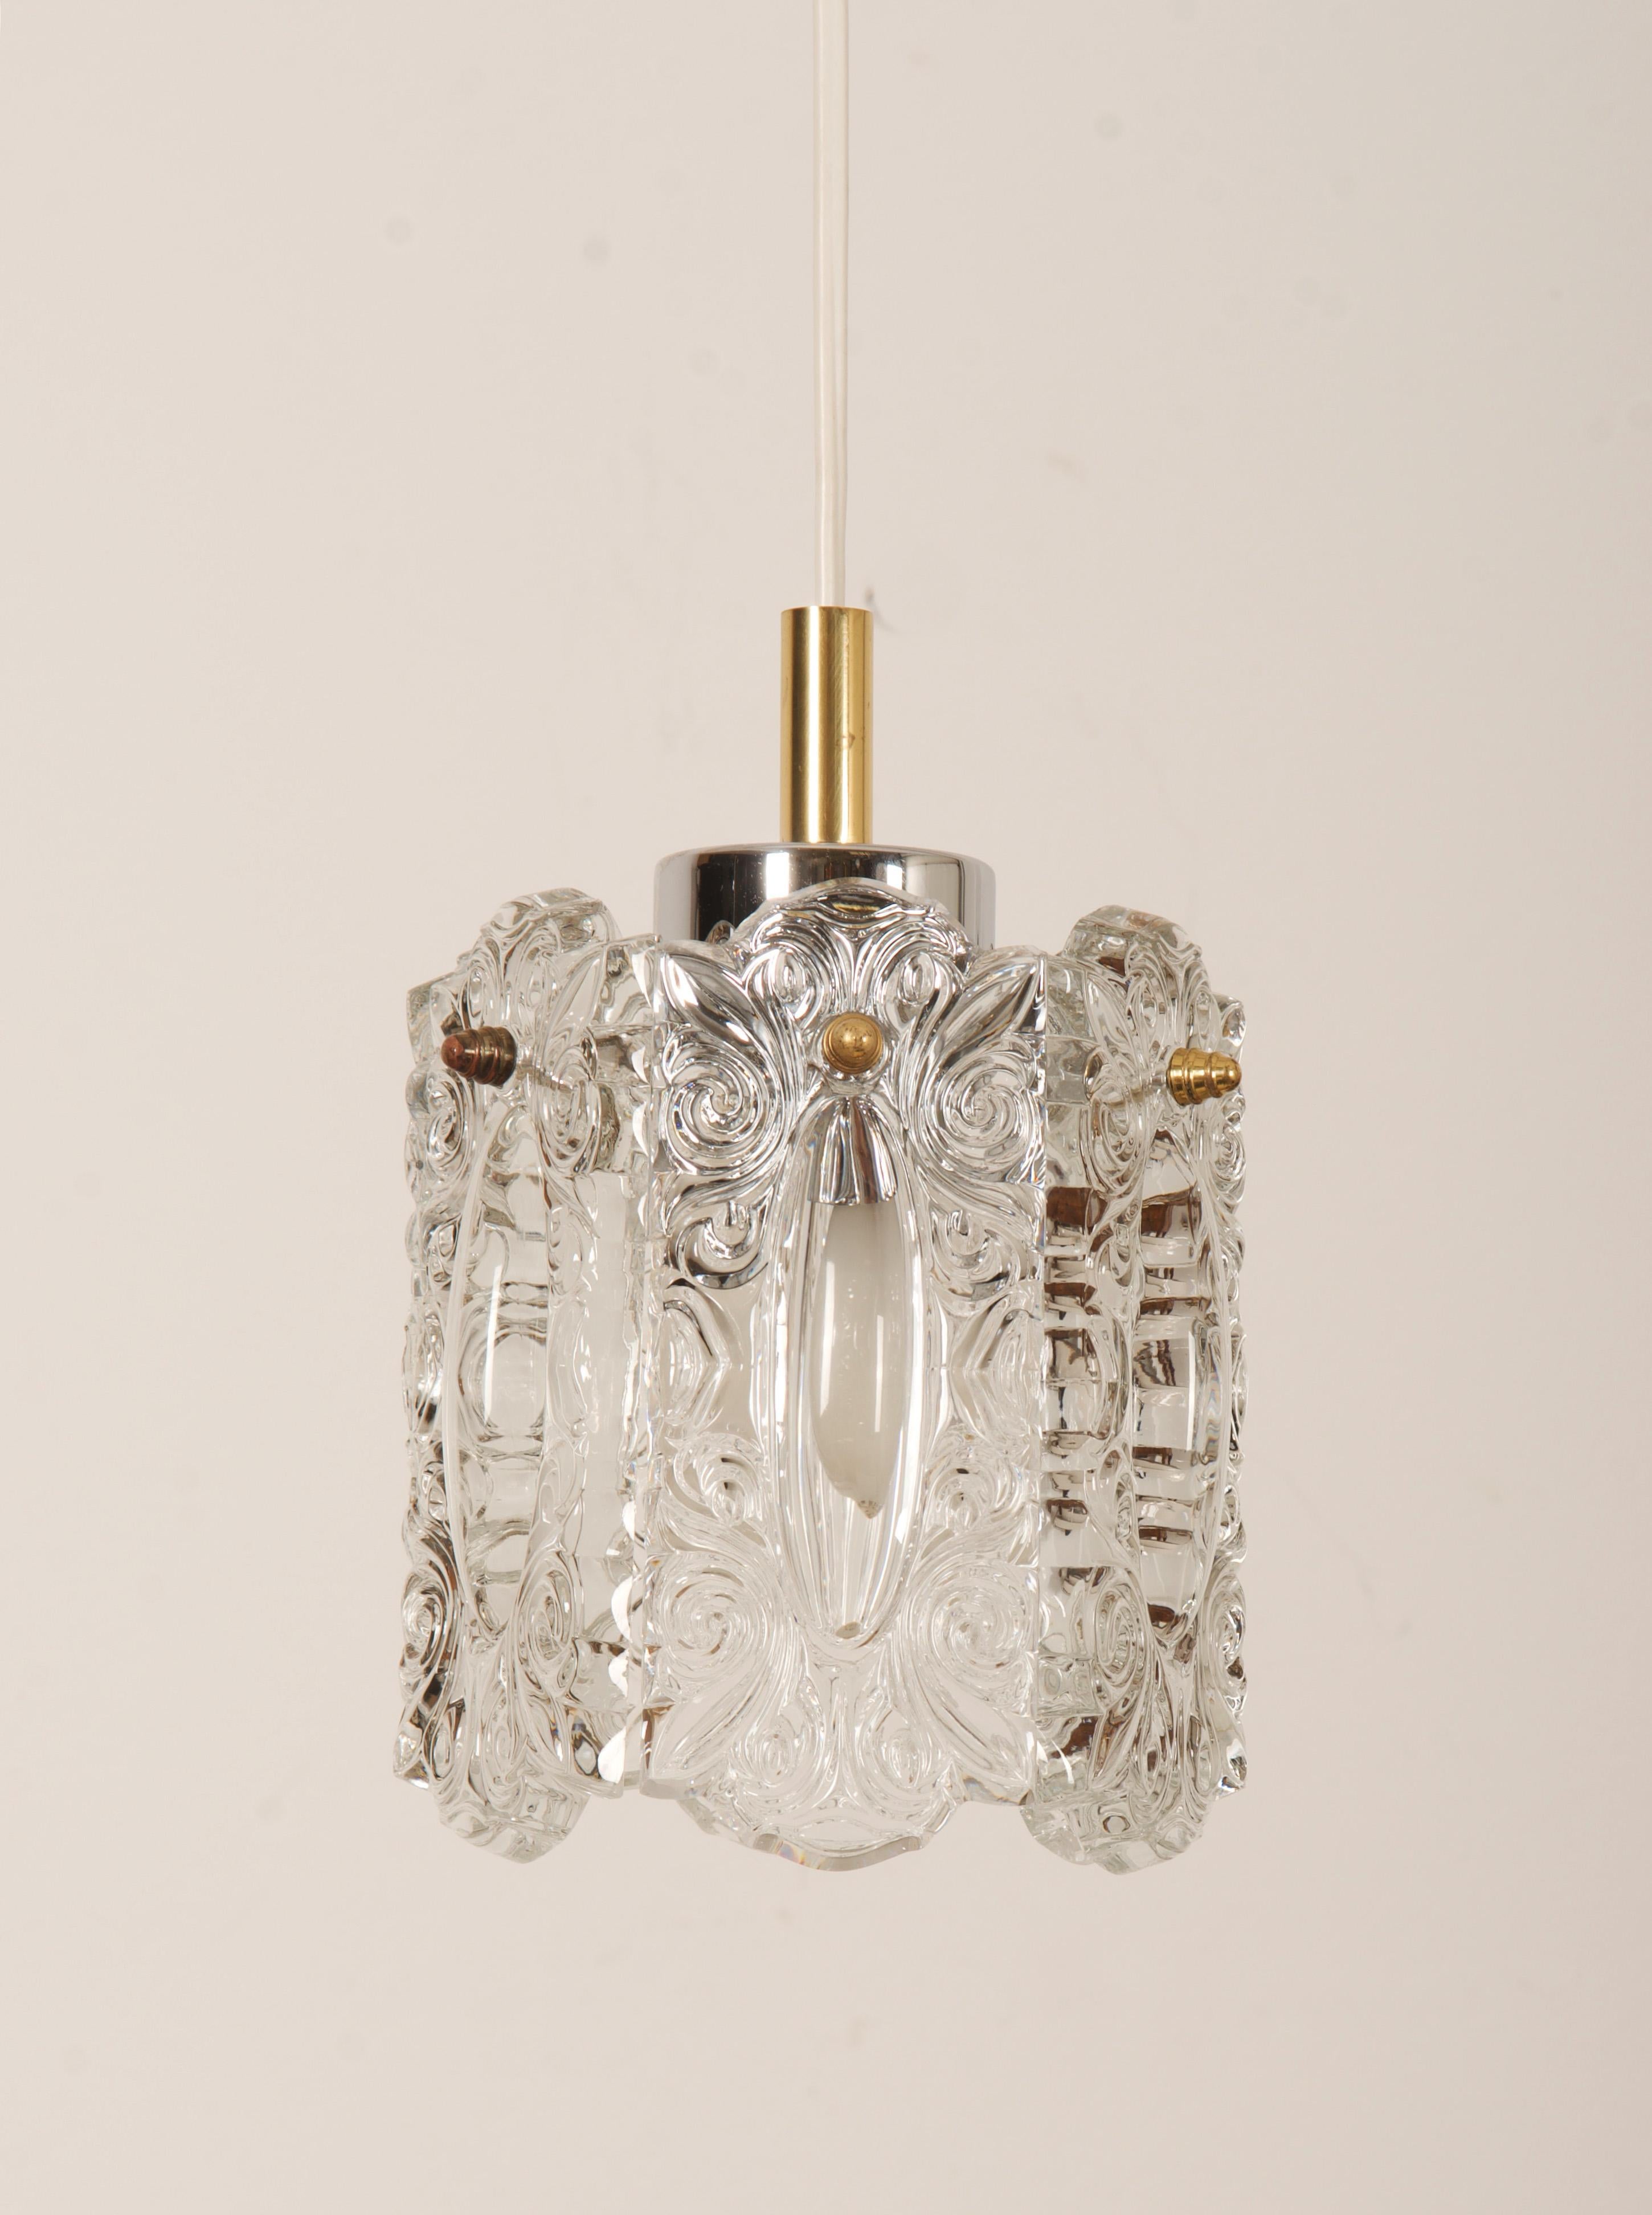 Scandinavian Modern Glass Pendant Lamp from the 1970s For Sale